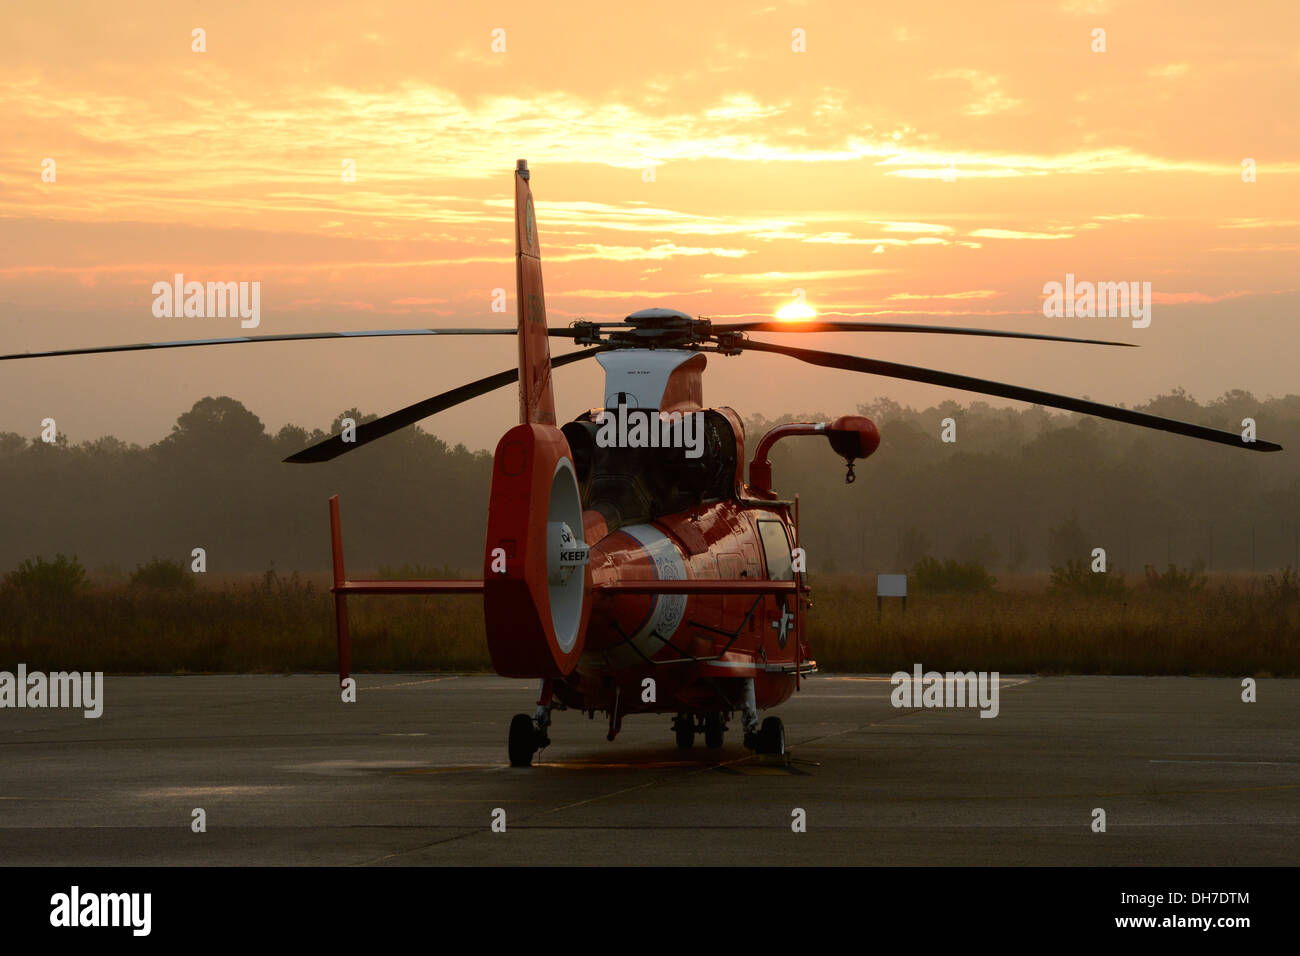 An MH-65 Dolphin helicopter sits at sunrise at Coast Guard Air Station Atlantic City, N.J., Thursday, Oct. 31, 2013. Air Station Atlantic City aircrews utilize the MH-65 Dolphin helicopter for search and rescue, law enforcement, and national security miss Stock Photo